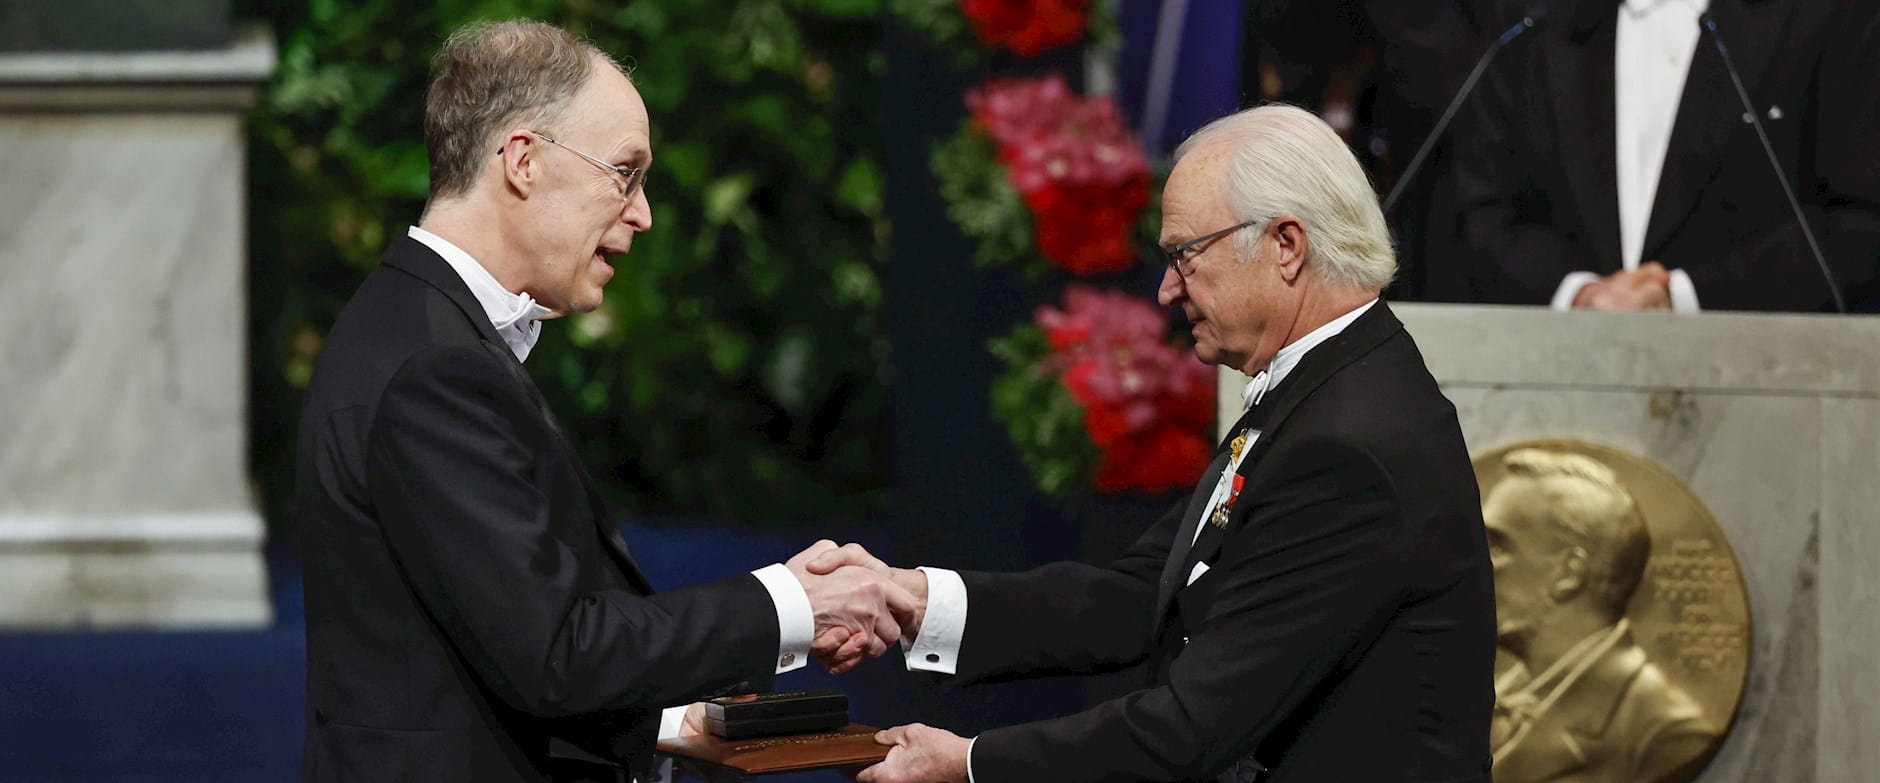 Prof. Douglas W. Diamond accepts the Sveriges Riksbank Prize in Economic Sciences in Memory of Alfred Nobel 2022 during a Dec. 10 award ceremony in Stockholm.